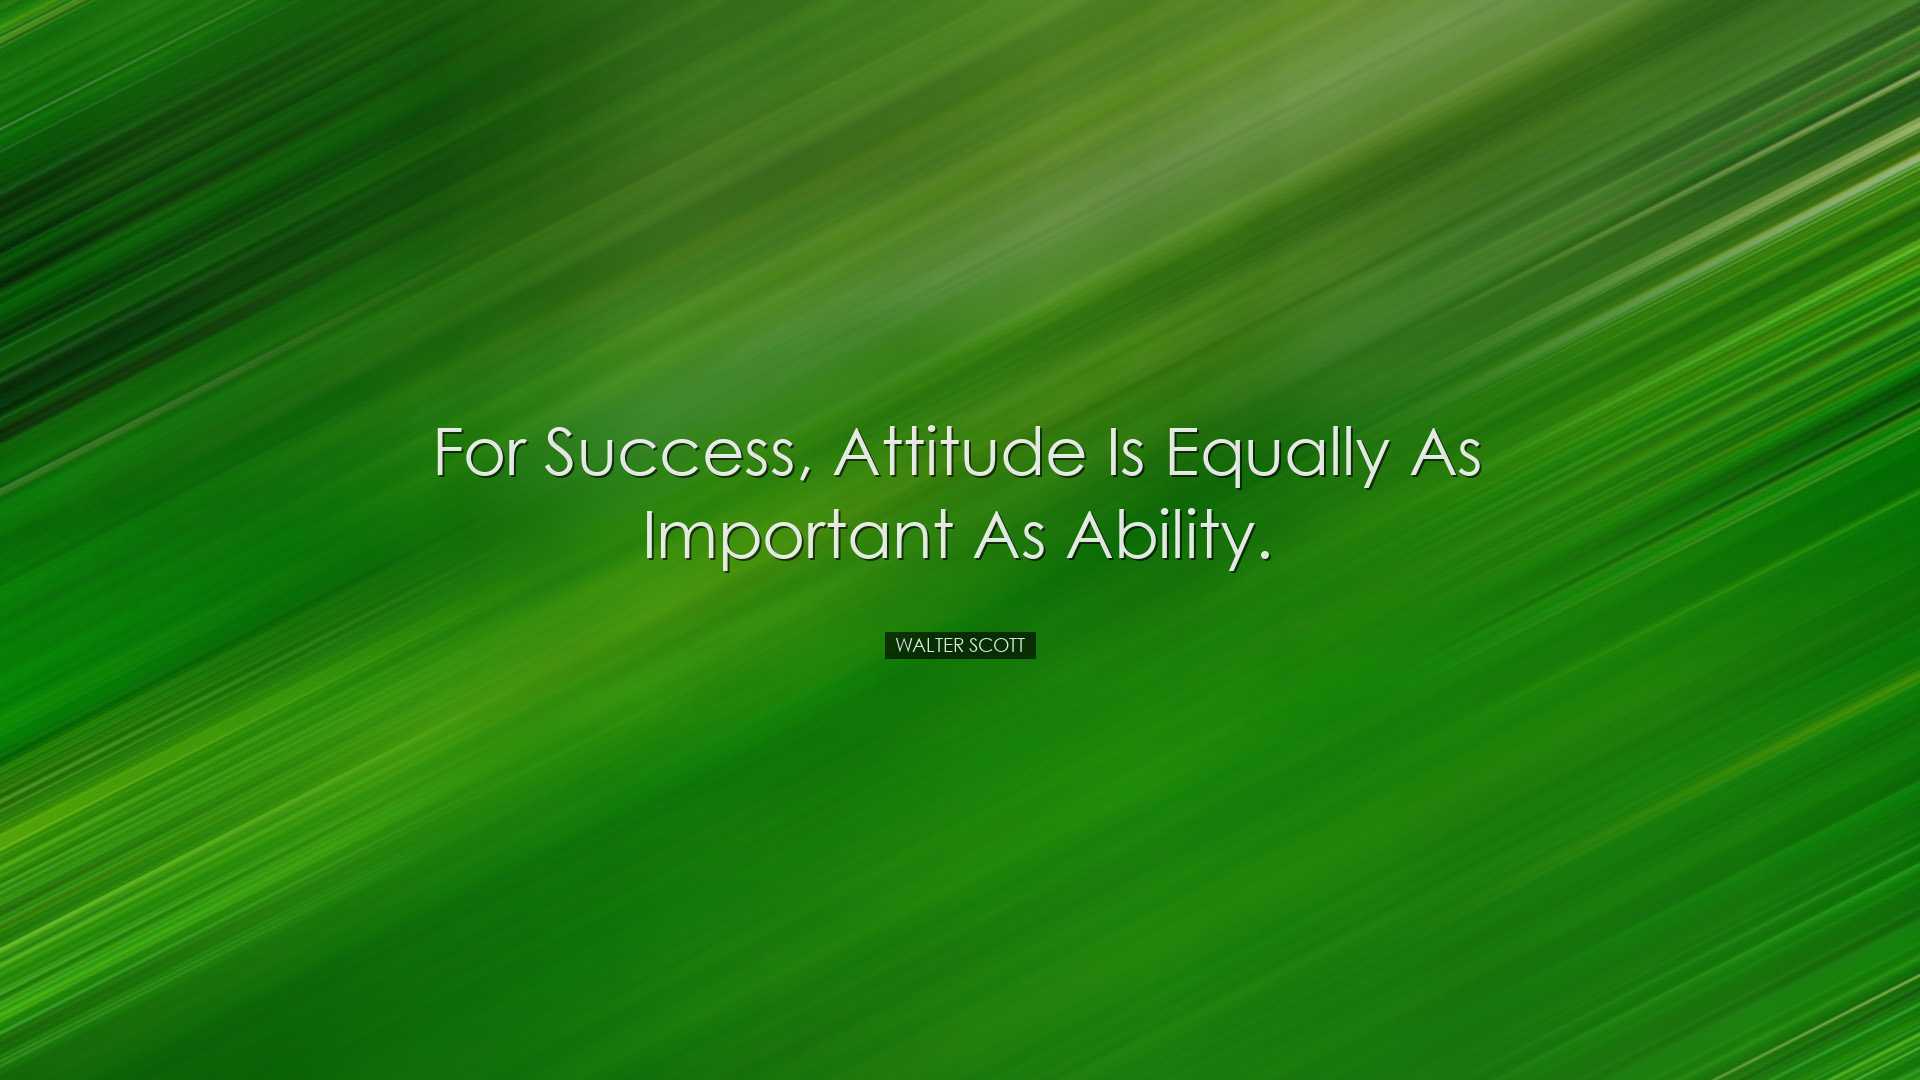 For success, attitude is equally as important as ability. - Walter